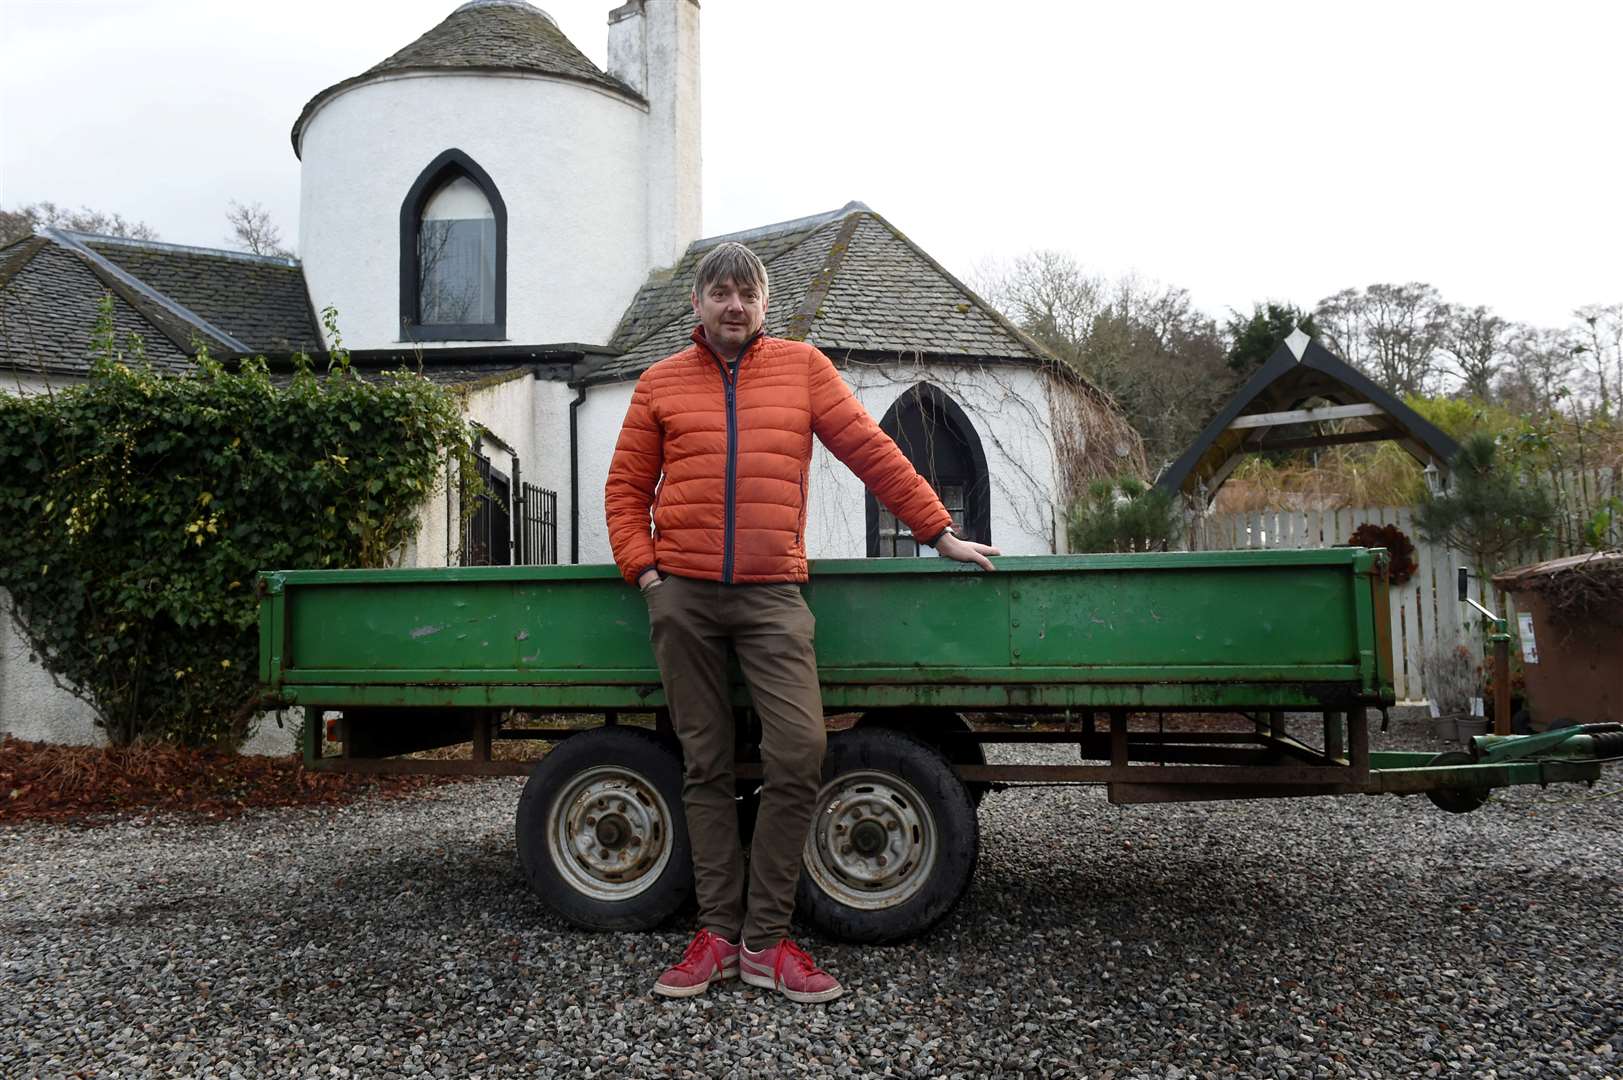 Rory Haigh and his double-axle trailer which he uses to transport garden waste.